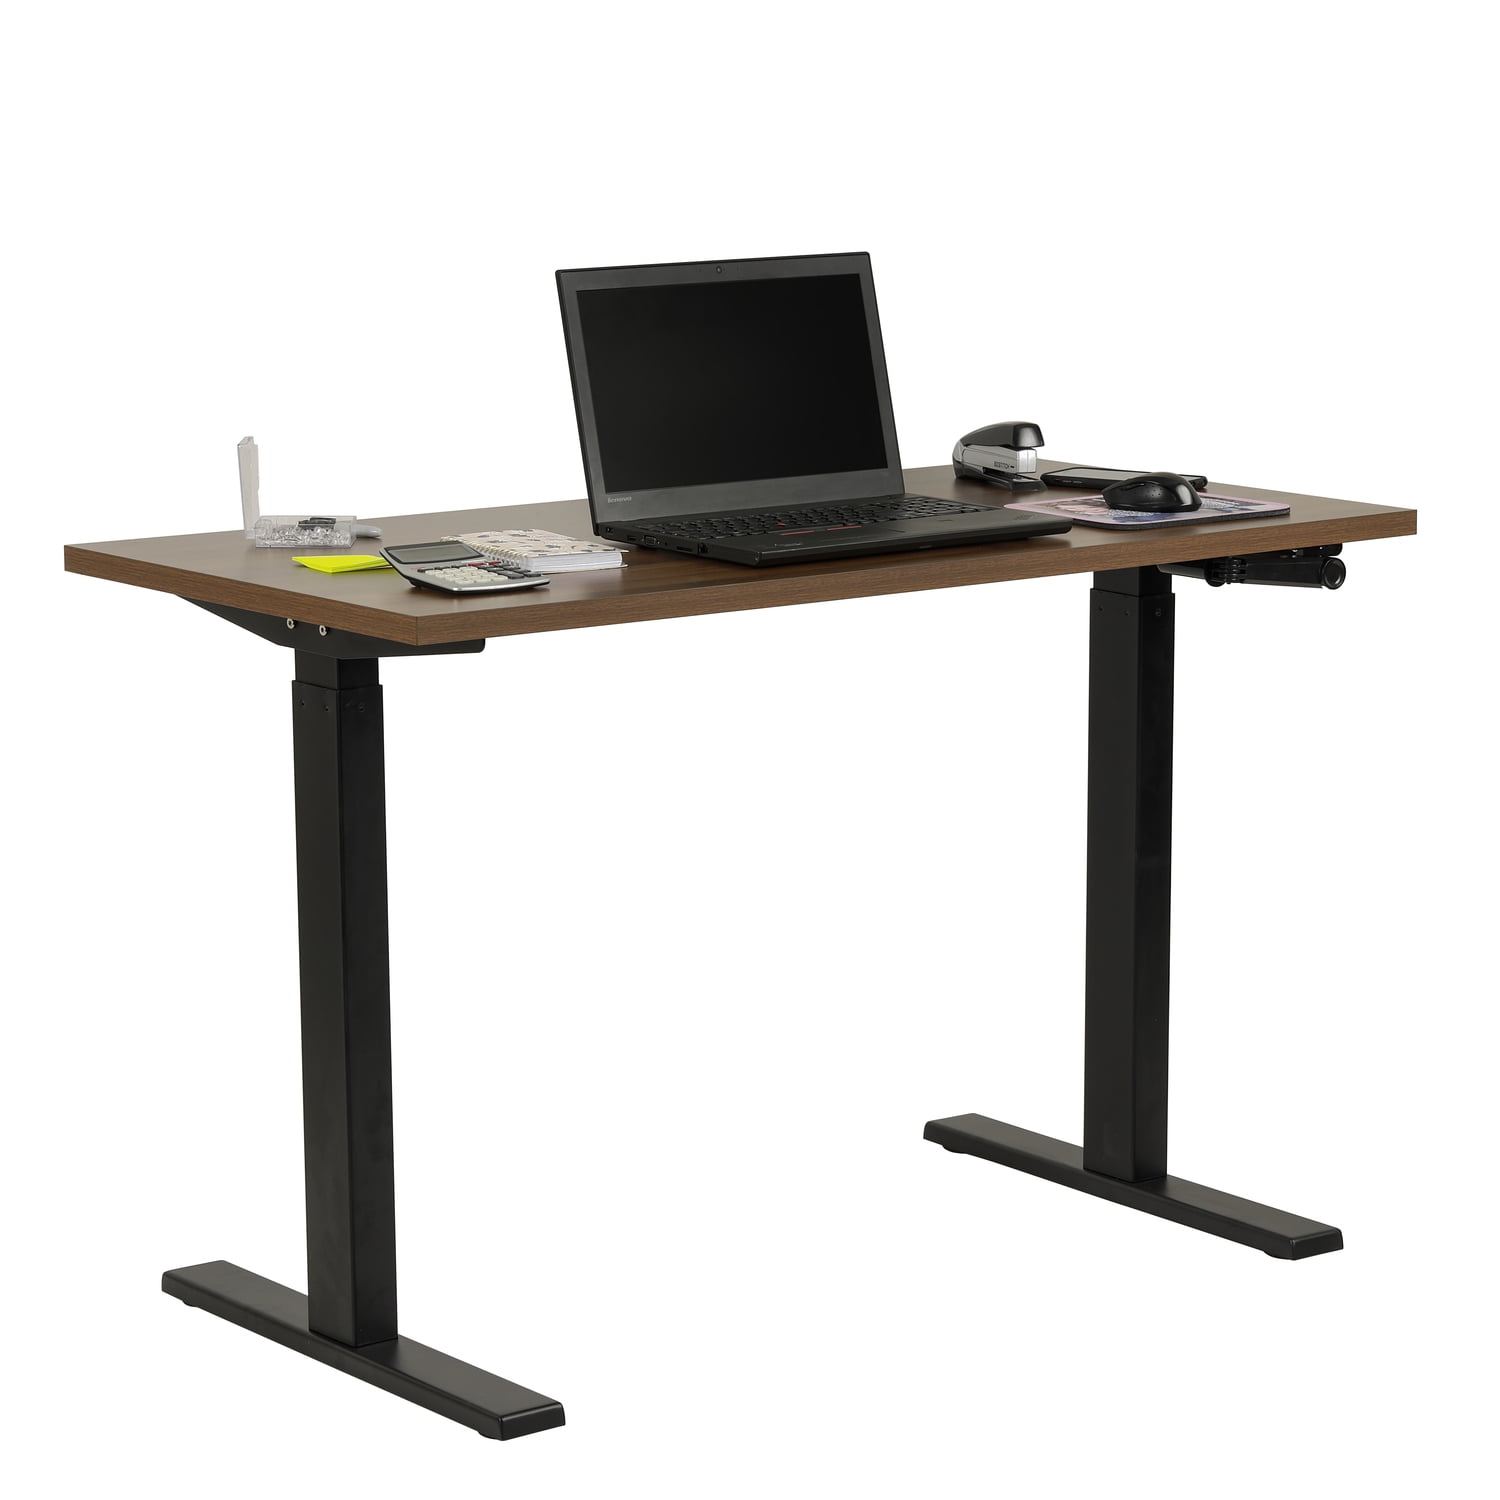 Picture of American Furniture Classics 23000 23.75-47.5 x 47.25 x 29.75 in. OS Home & Office Furniture Adjustable Height Desk